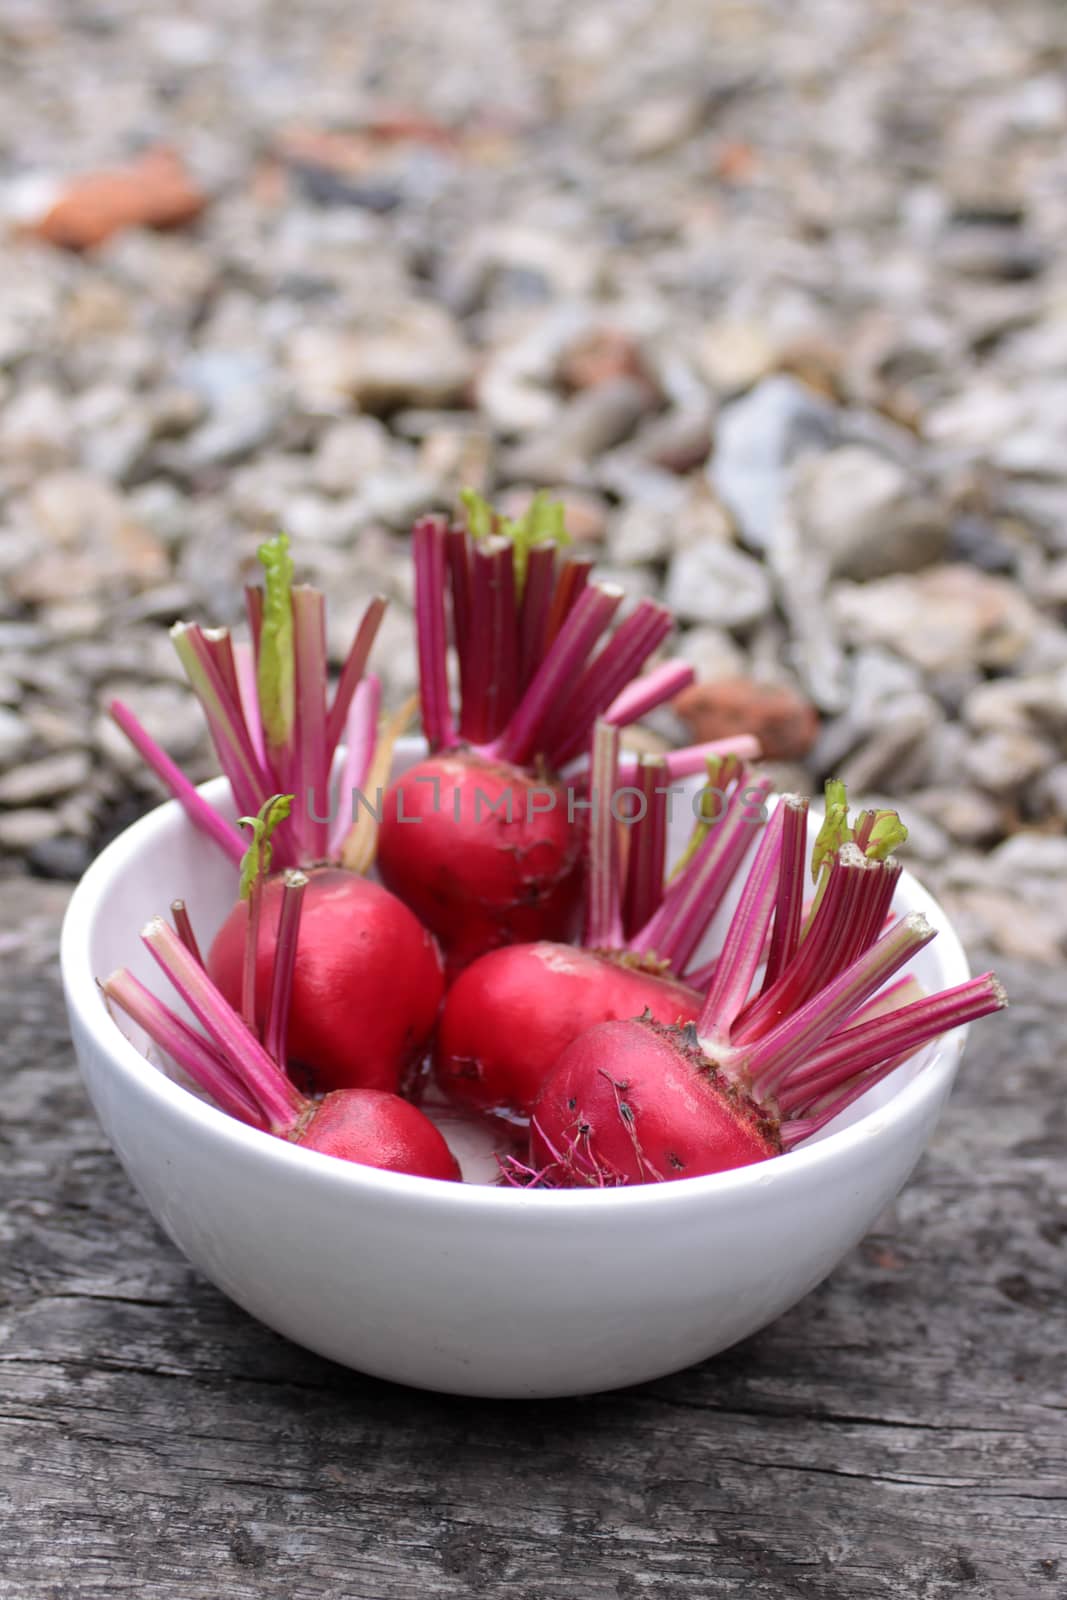 Beets in a Bowl by naffarts2